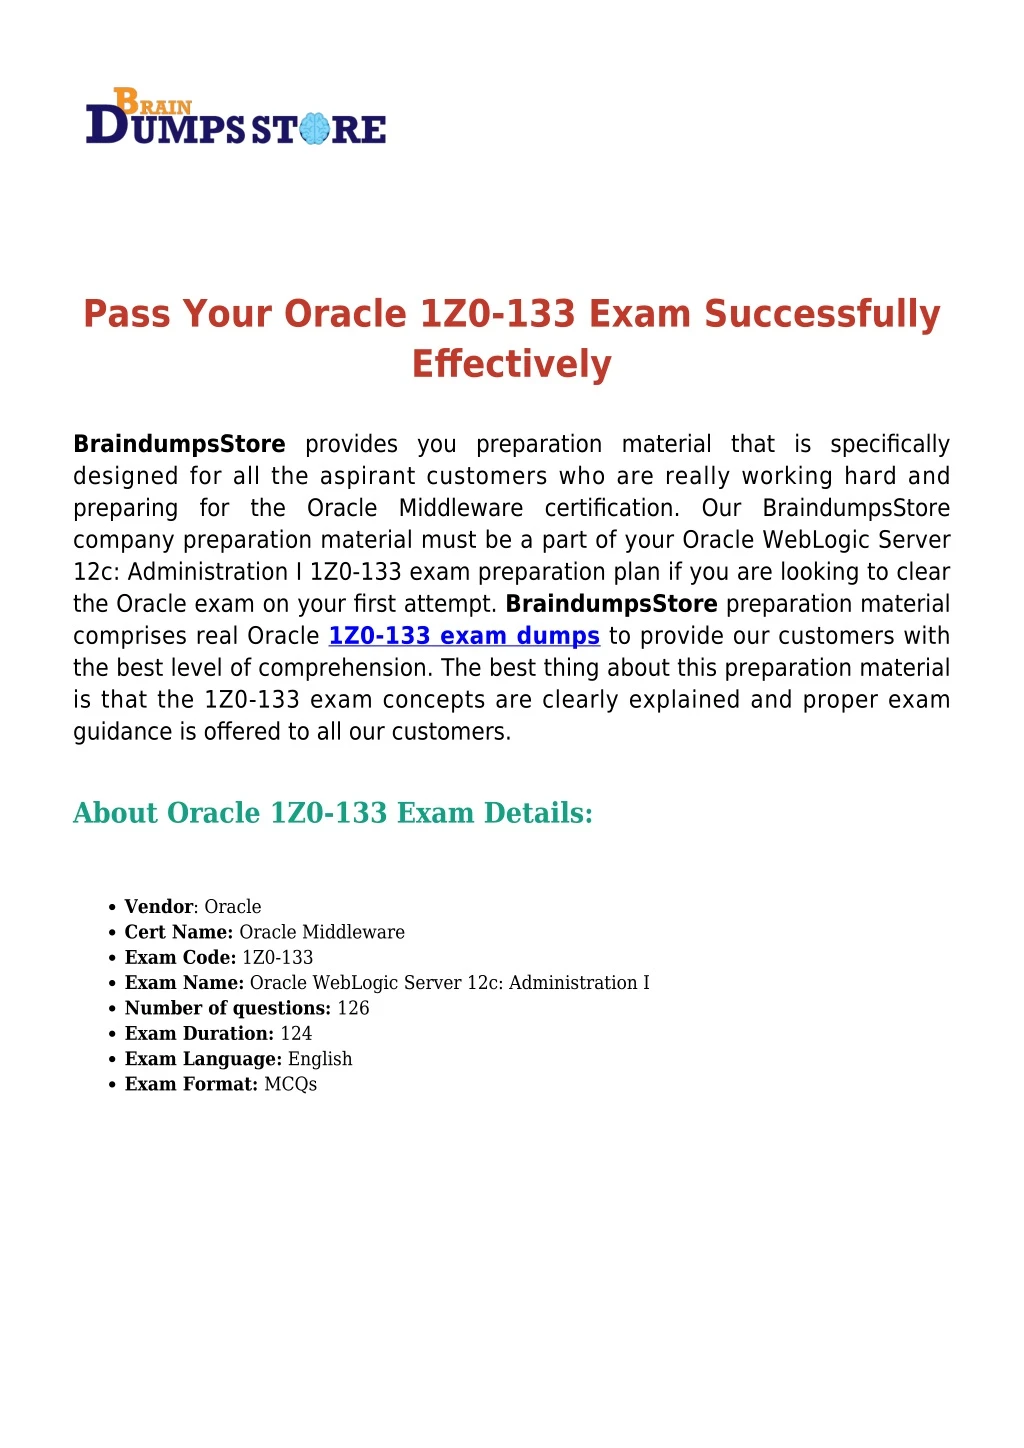 pass your oracle 1z0 133 exam successfully